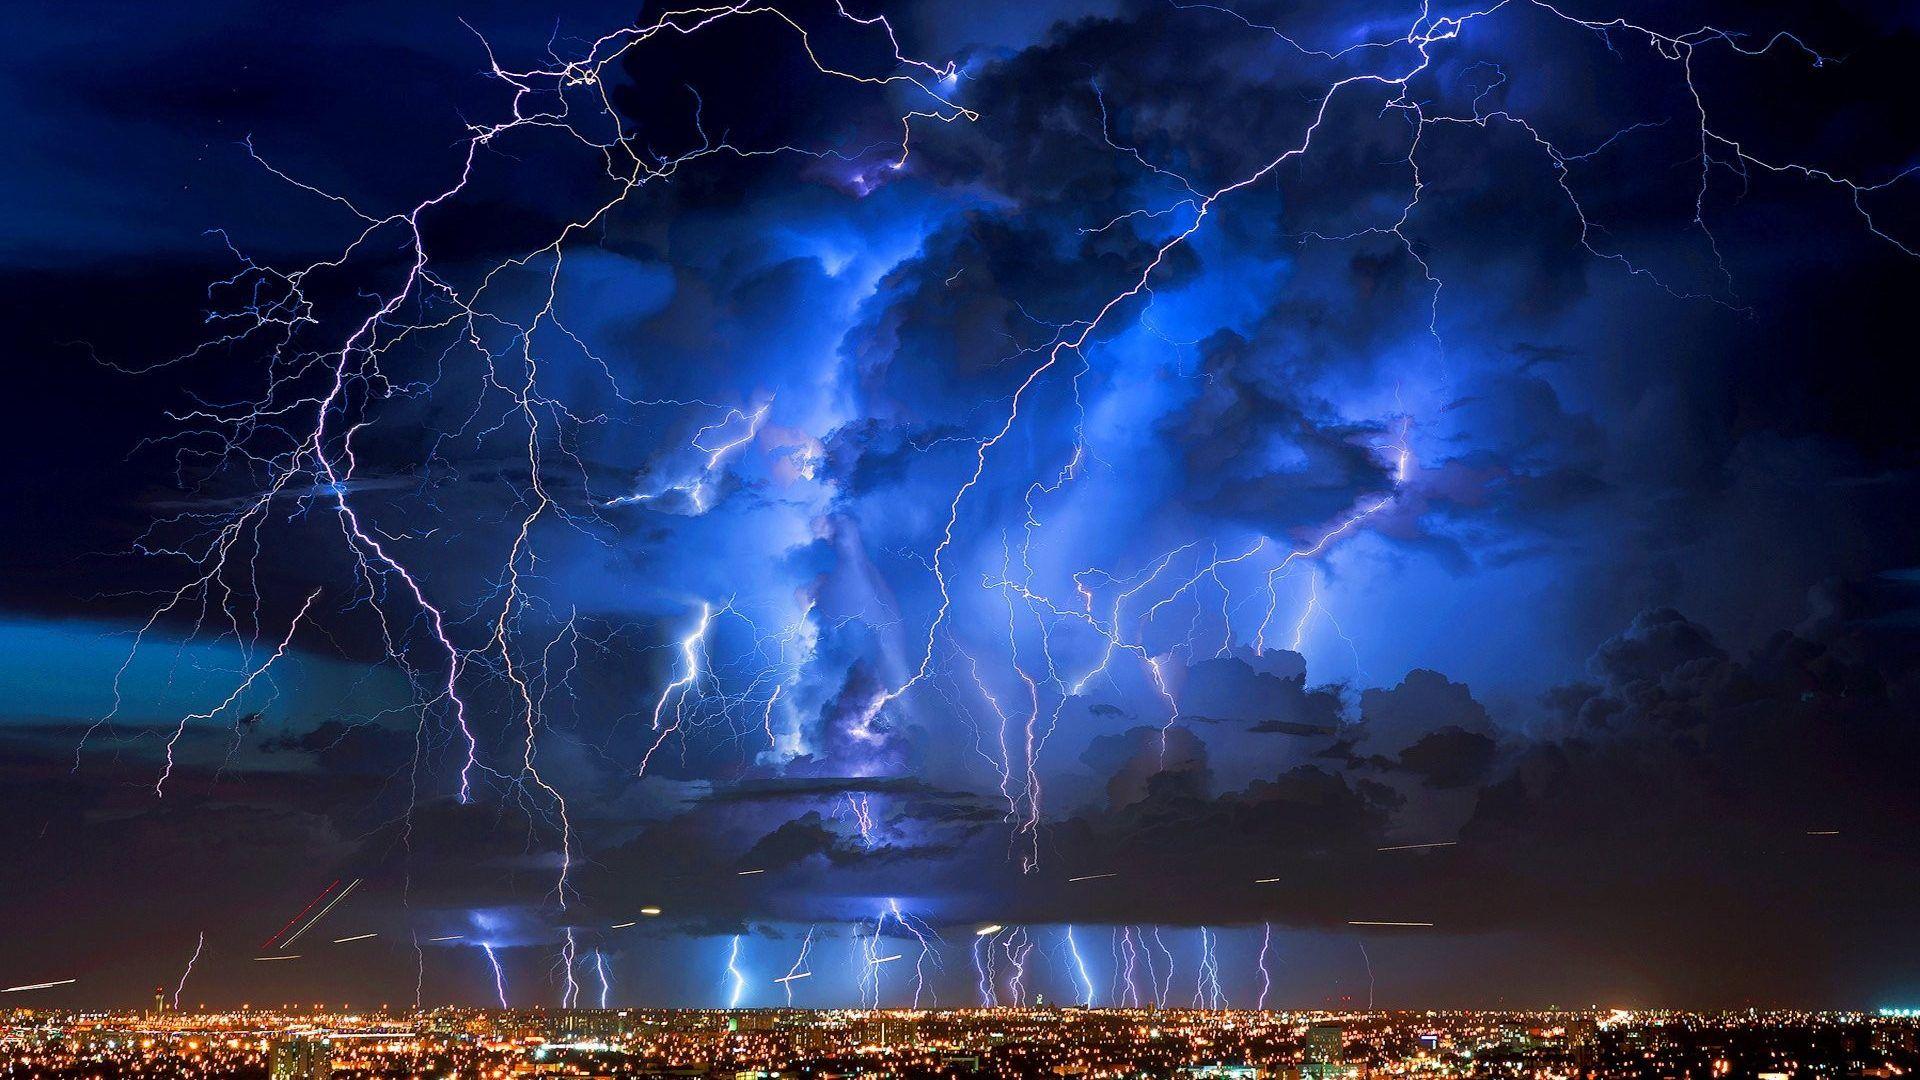 HD Lightning Wallpapers Top Free HD Lightning Backgrounds